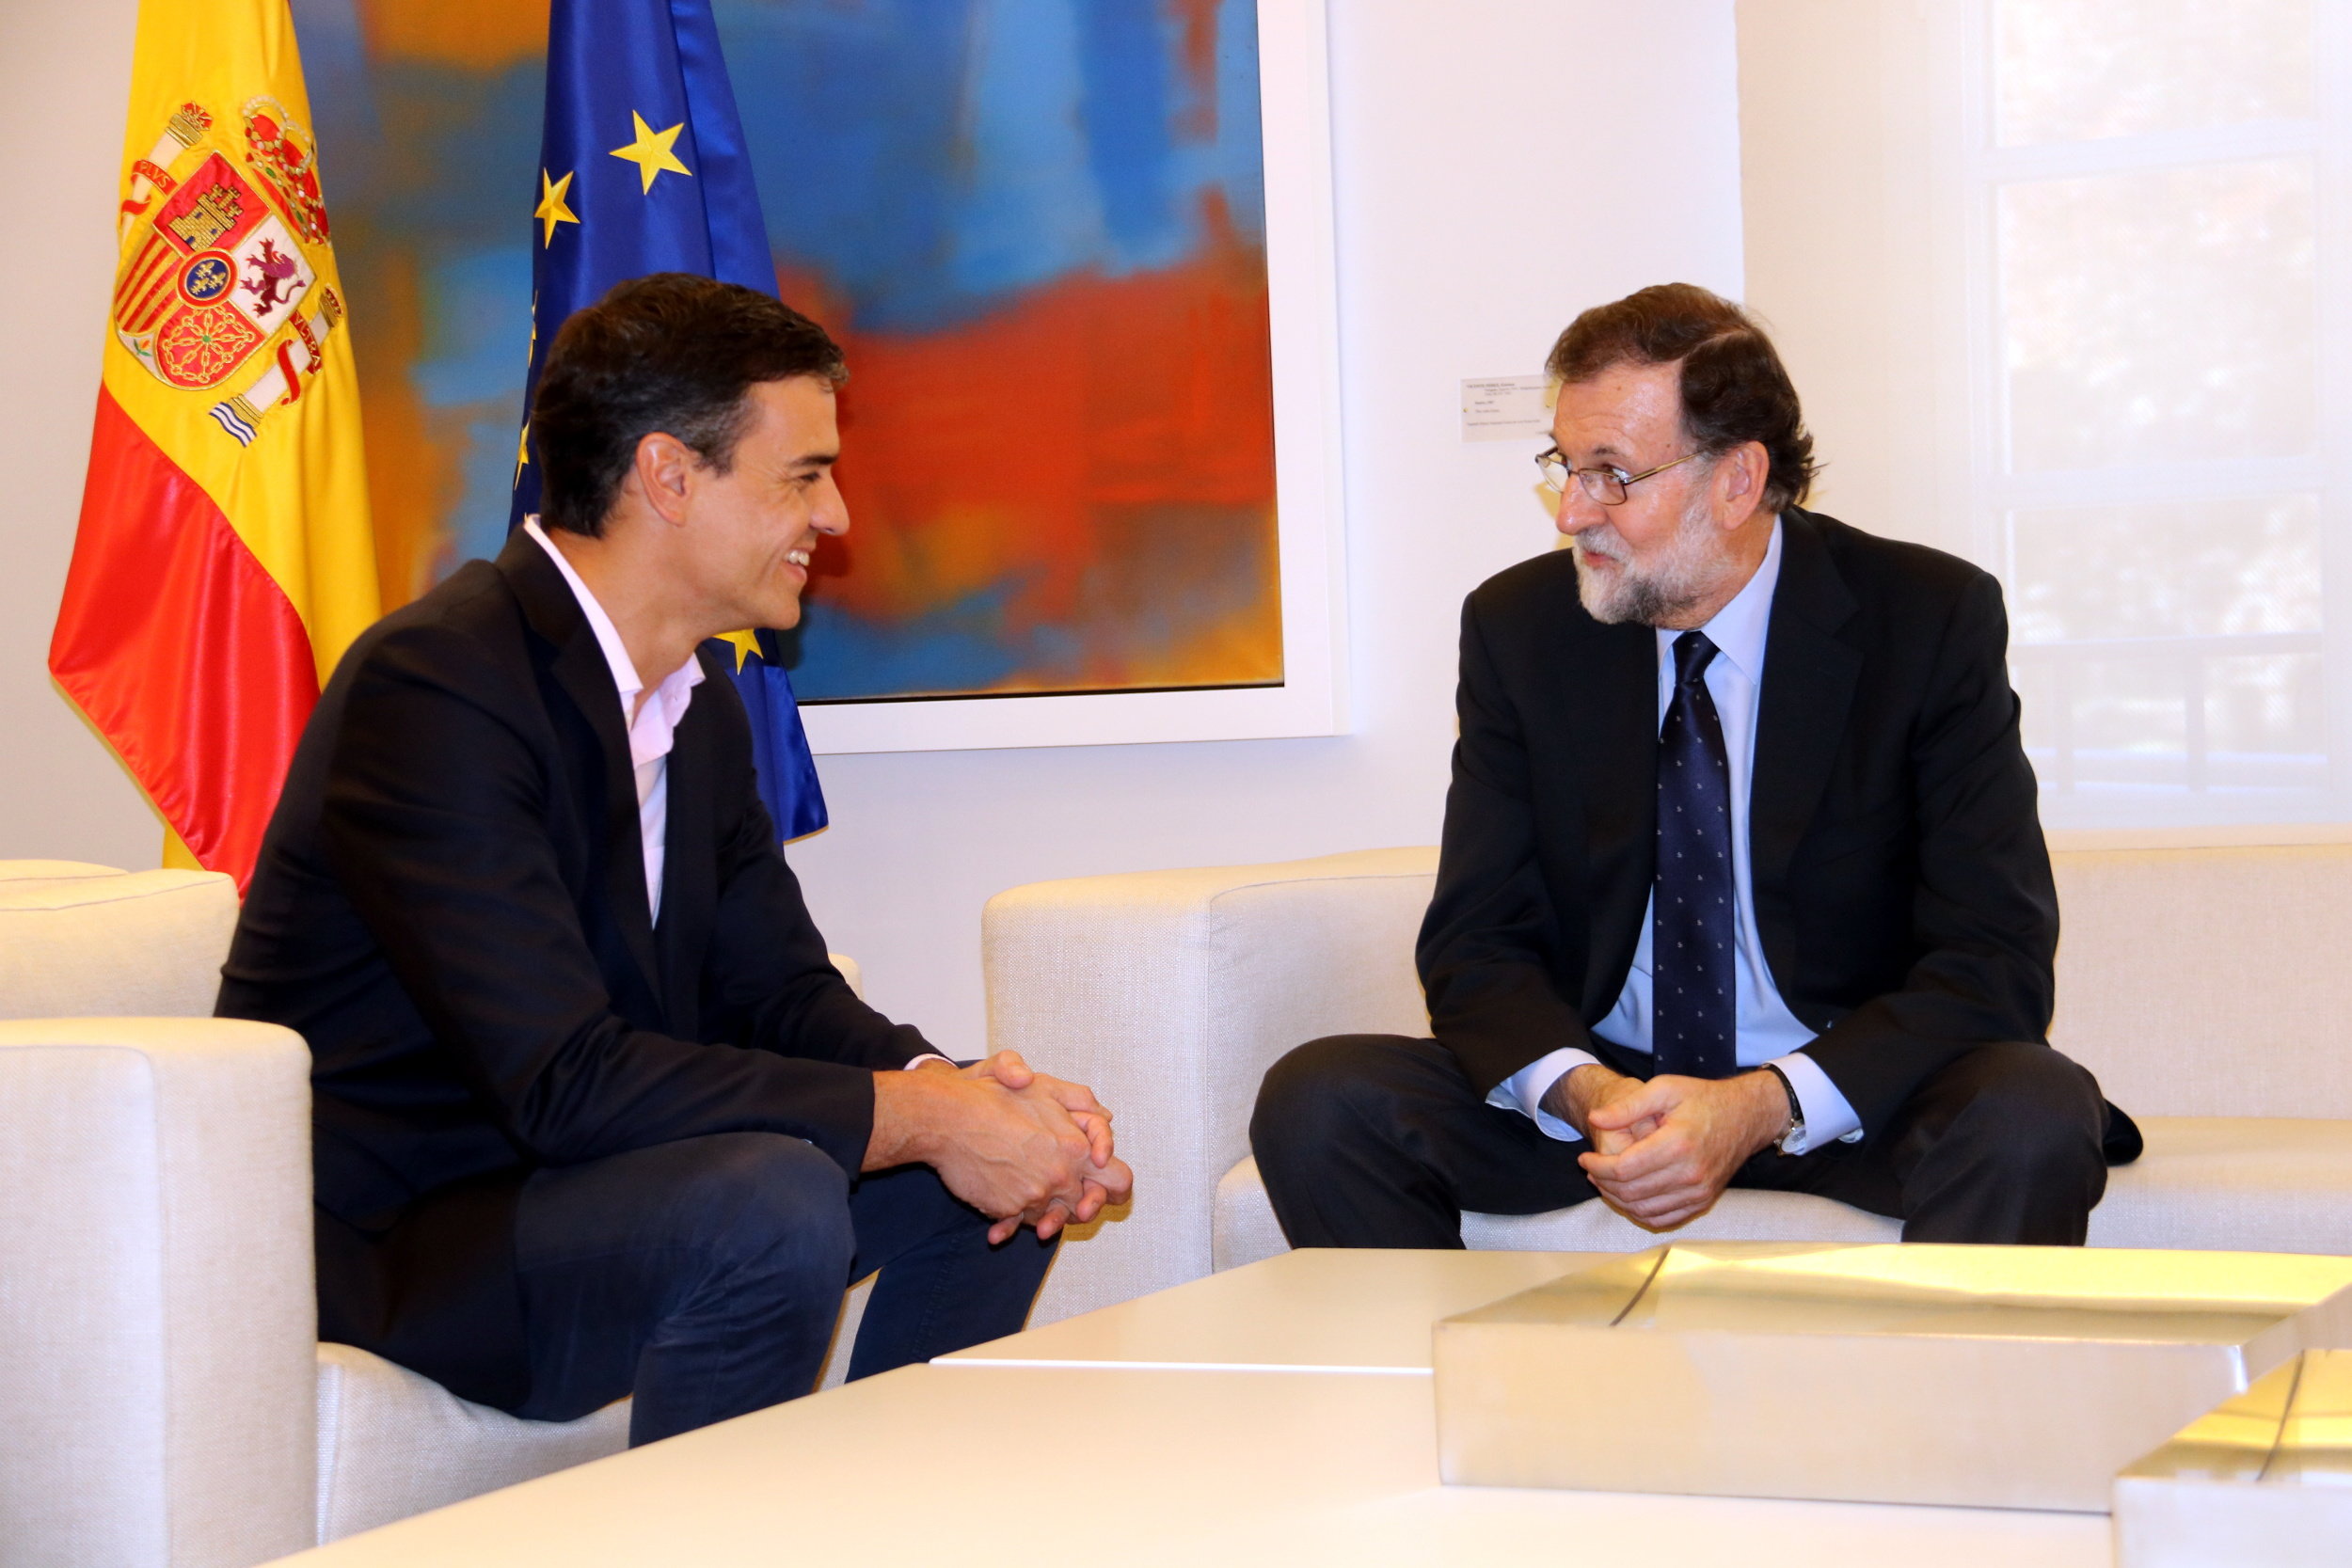 Mariano Rajoy and Pedro Sánchez during a meeting on October 2, 2017 (by Tània Tàpia)